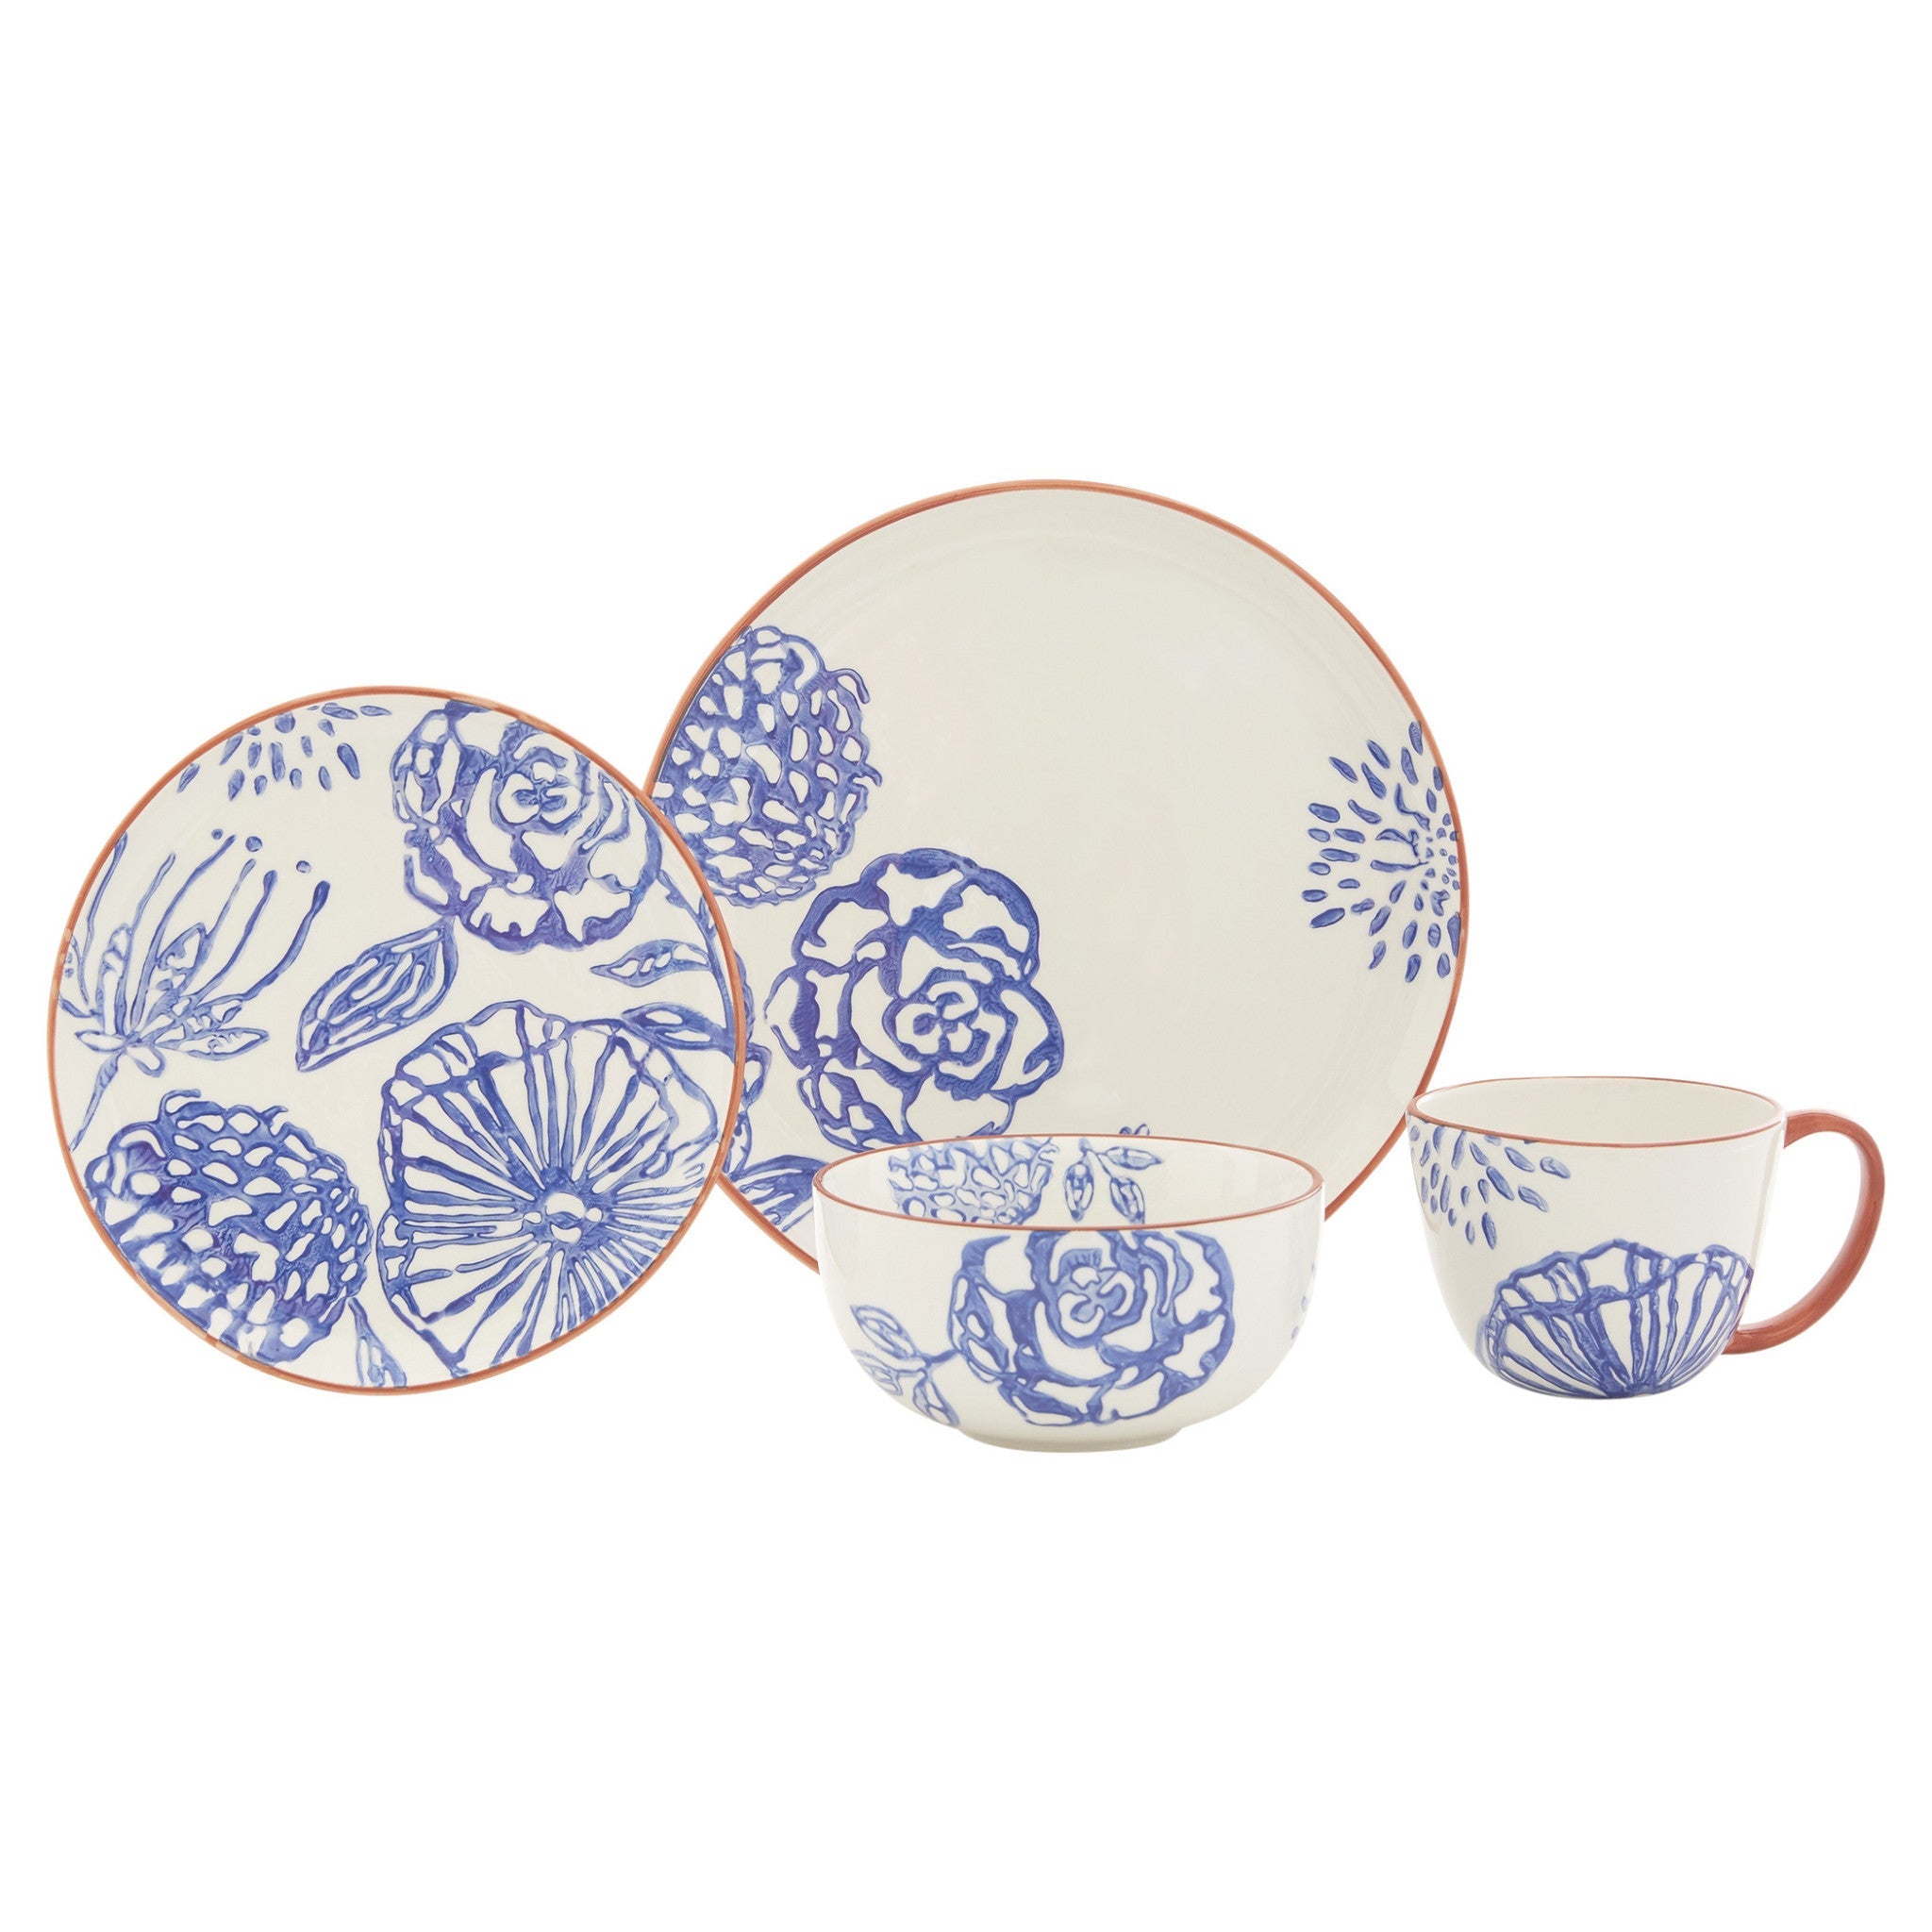 Blue-and-White-Sixteen-Piece-Round-Floral-Ceramic-Service-For-Four-Dinnerware-Set-Dinnerware-Sets